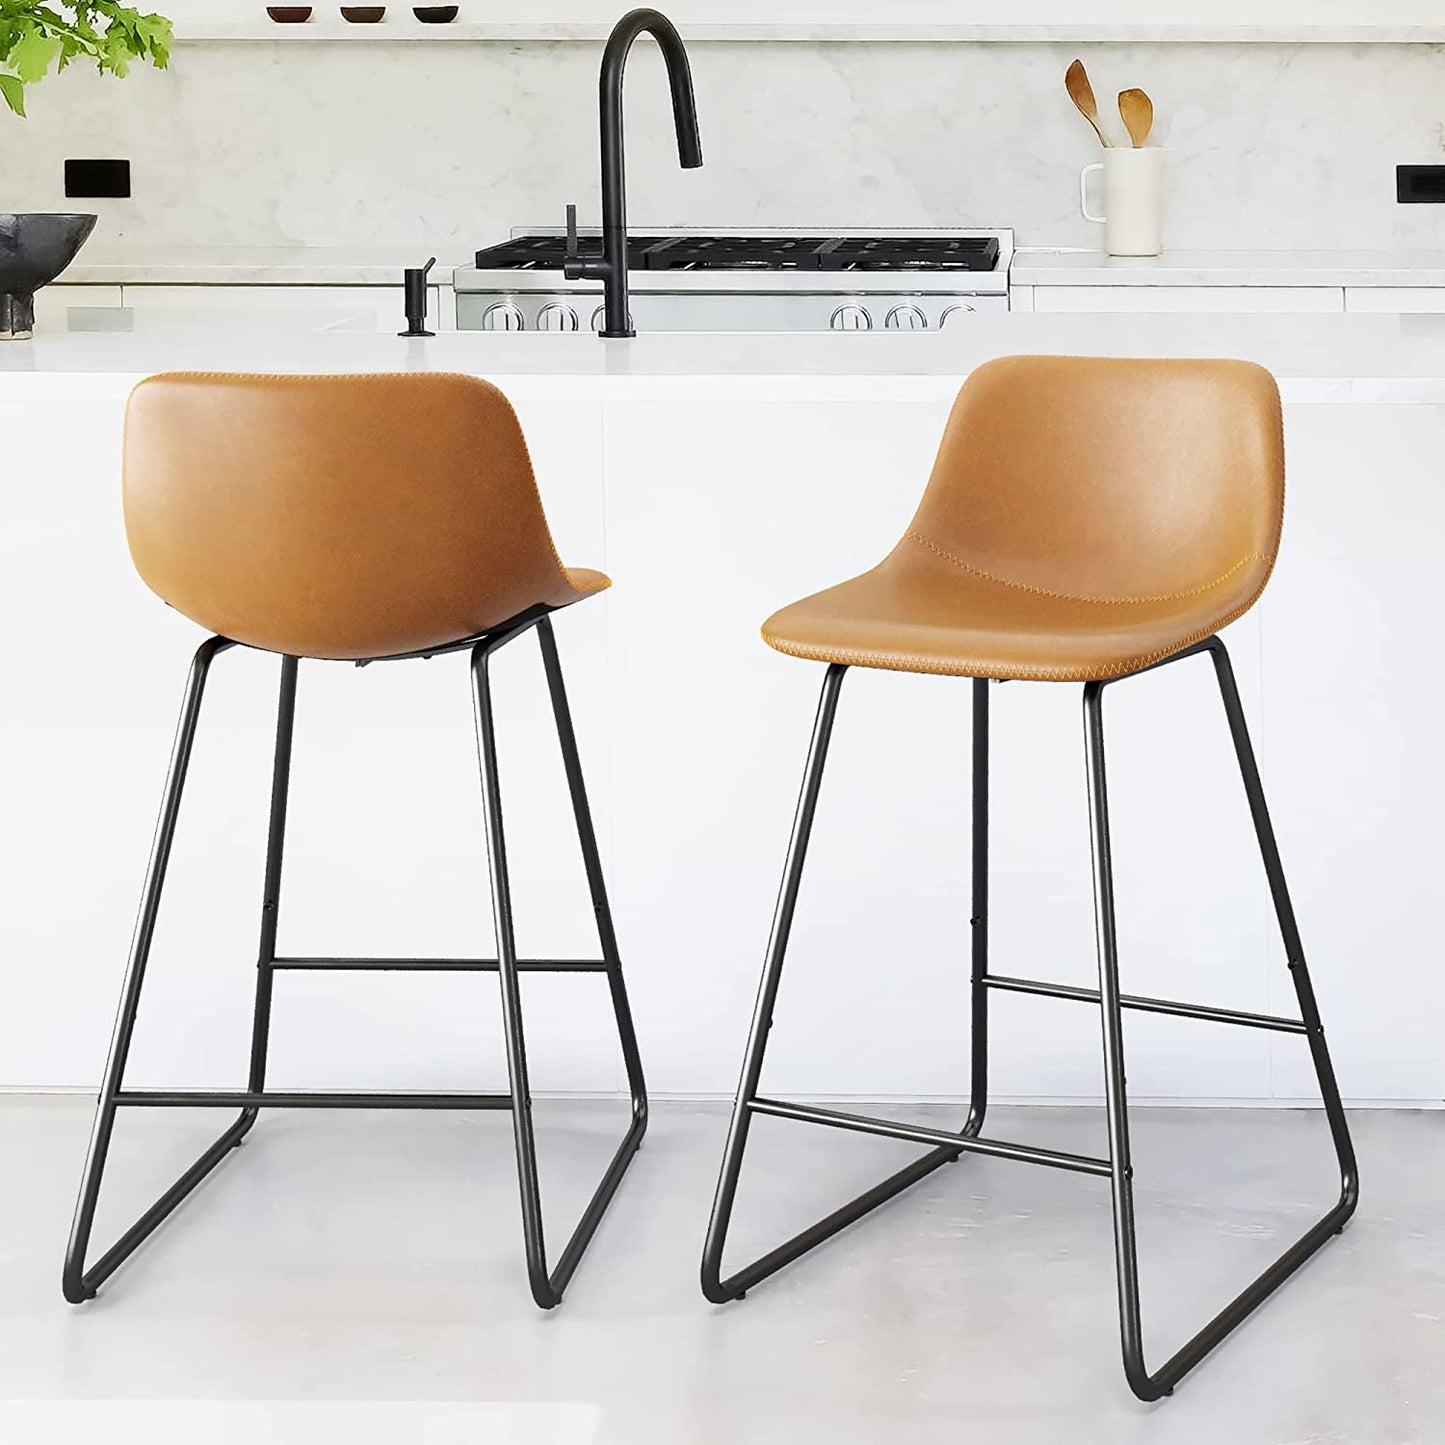 Industrial Faux Leather Bar Stools Set of 4